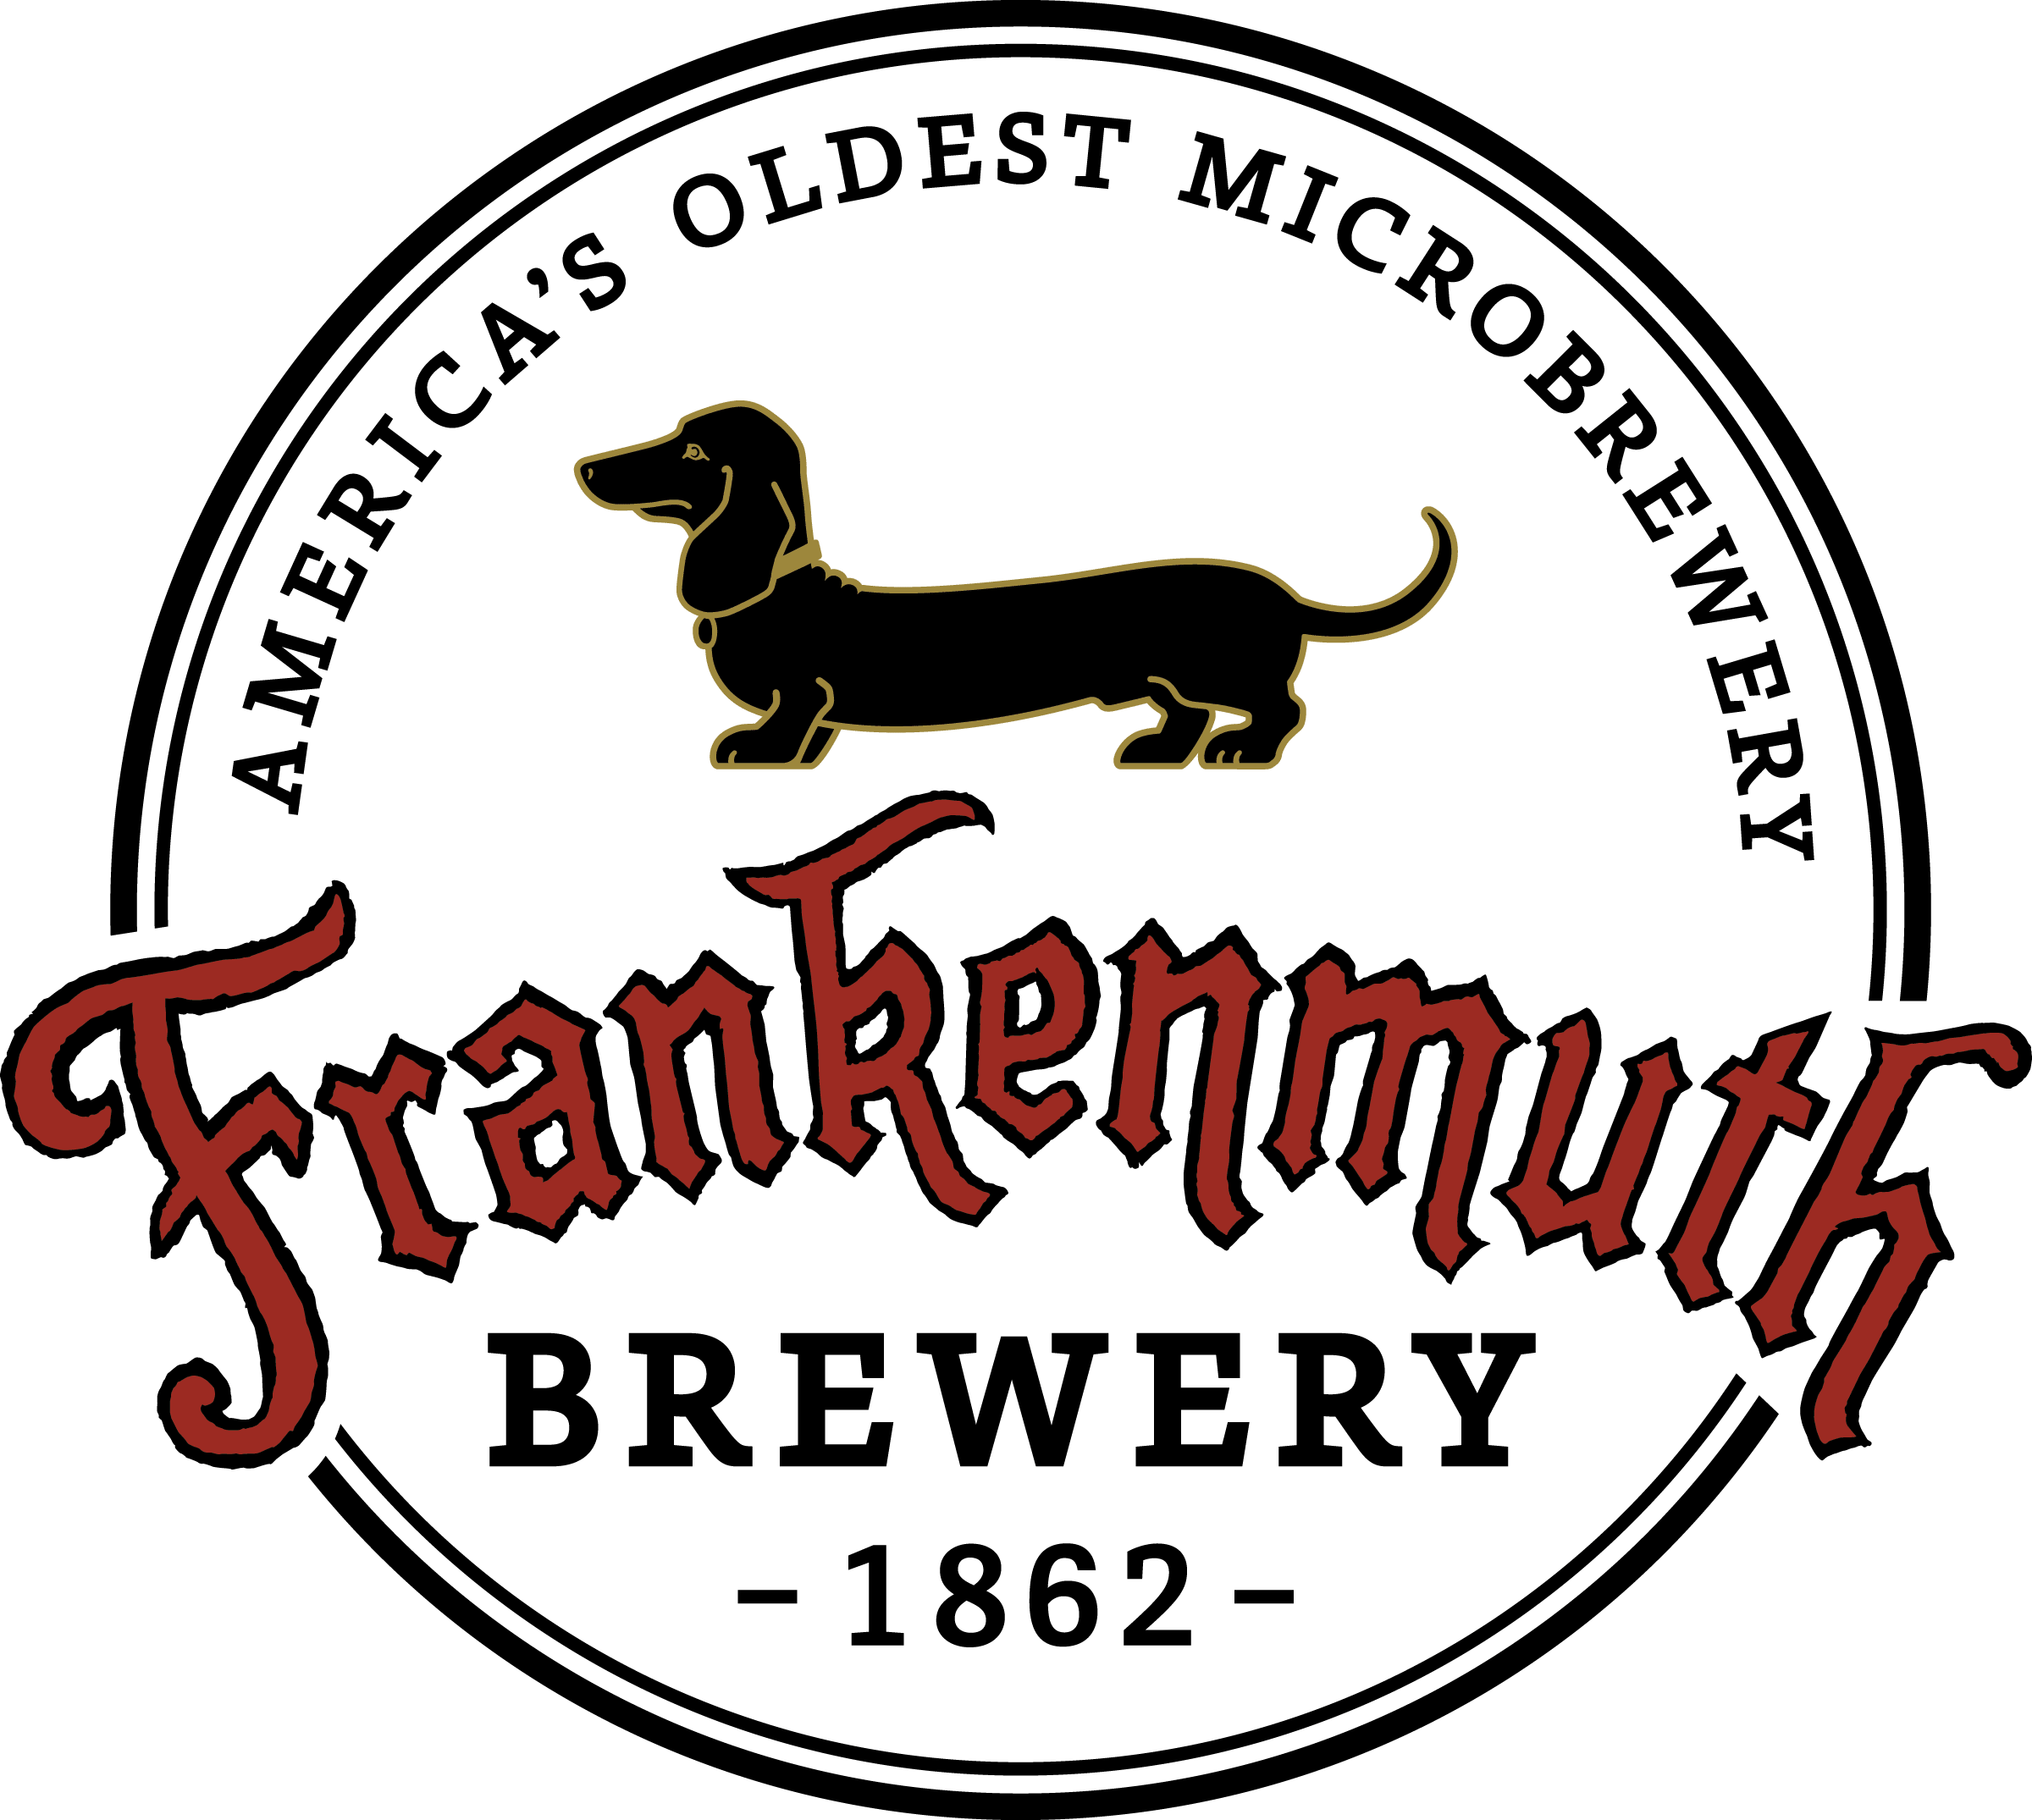 Old Red Dog Beer Logo - Oldest Brewery in Michigan |Frankenmuth Brewery